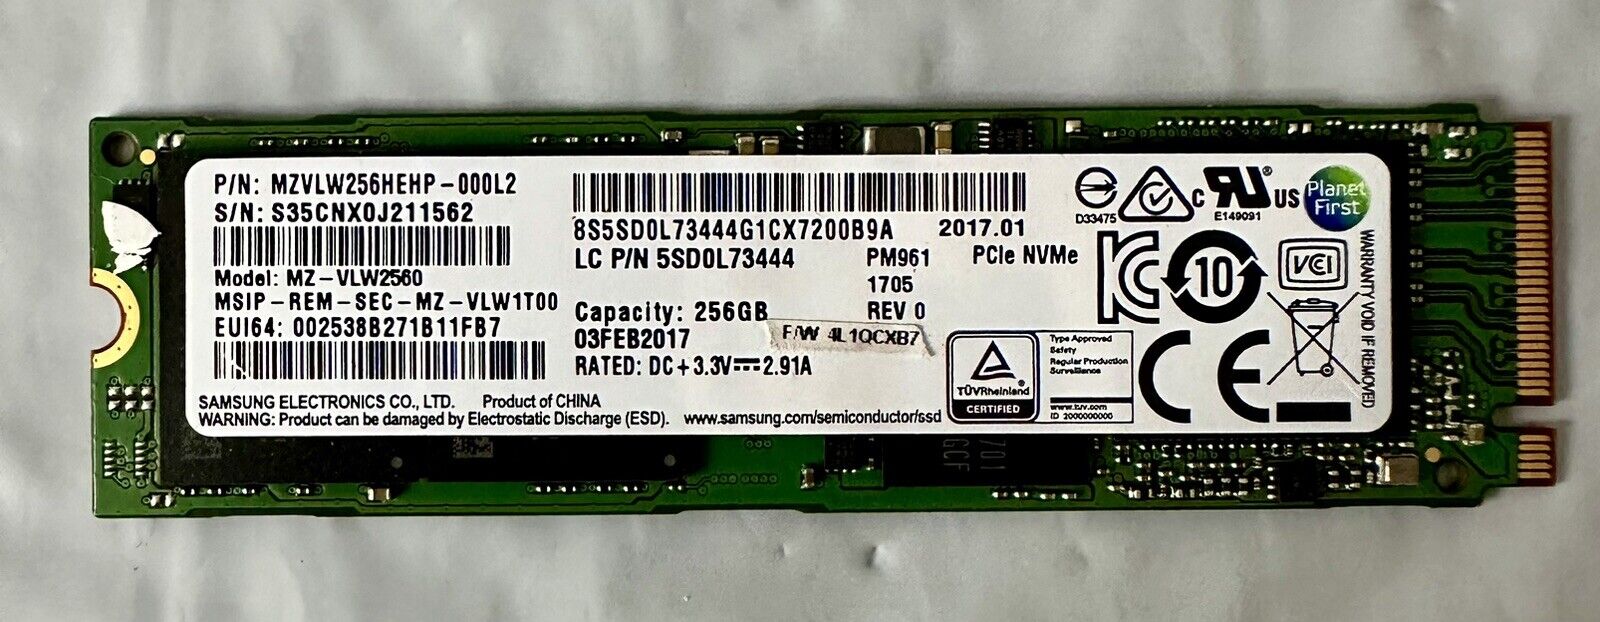 Samsung PM961 256GB PCLe NVMe M.2 SSD Solid State Drive MZVLW256HEHP-000L2